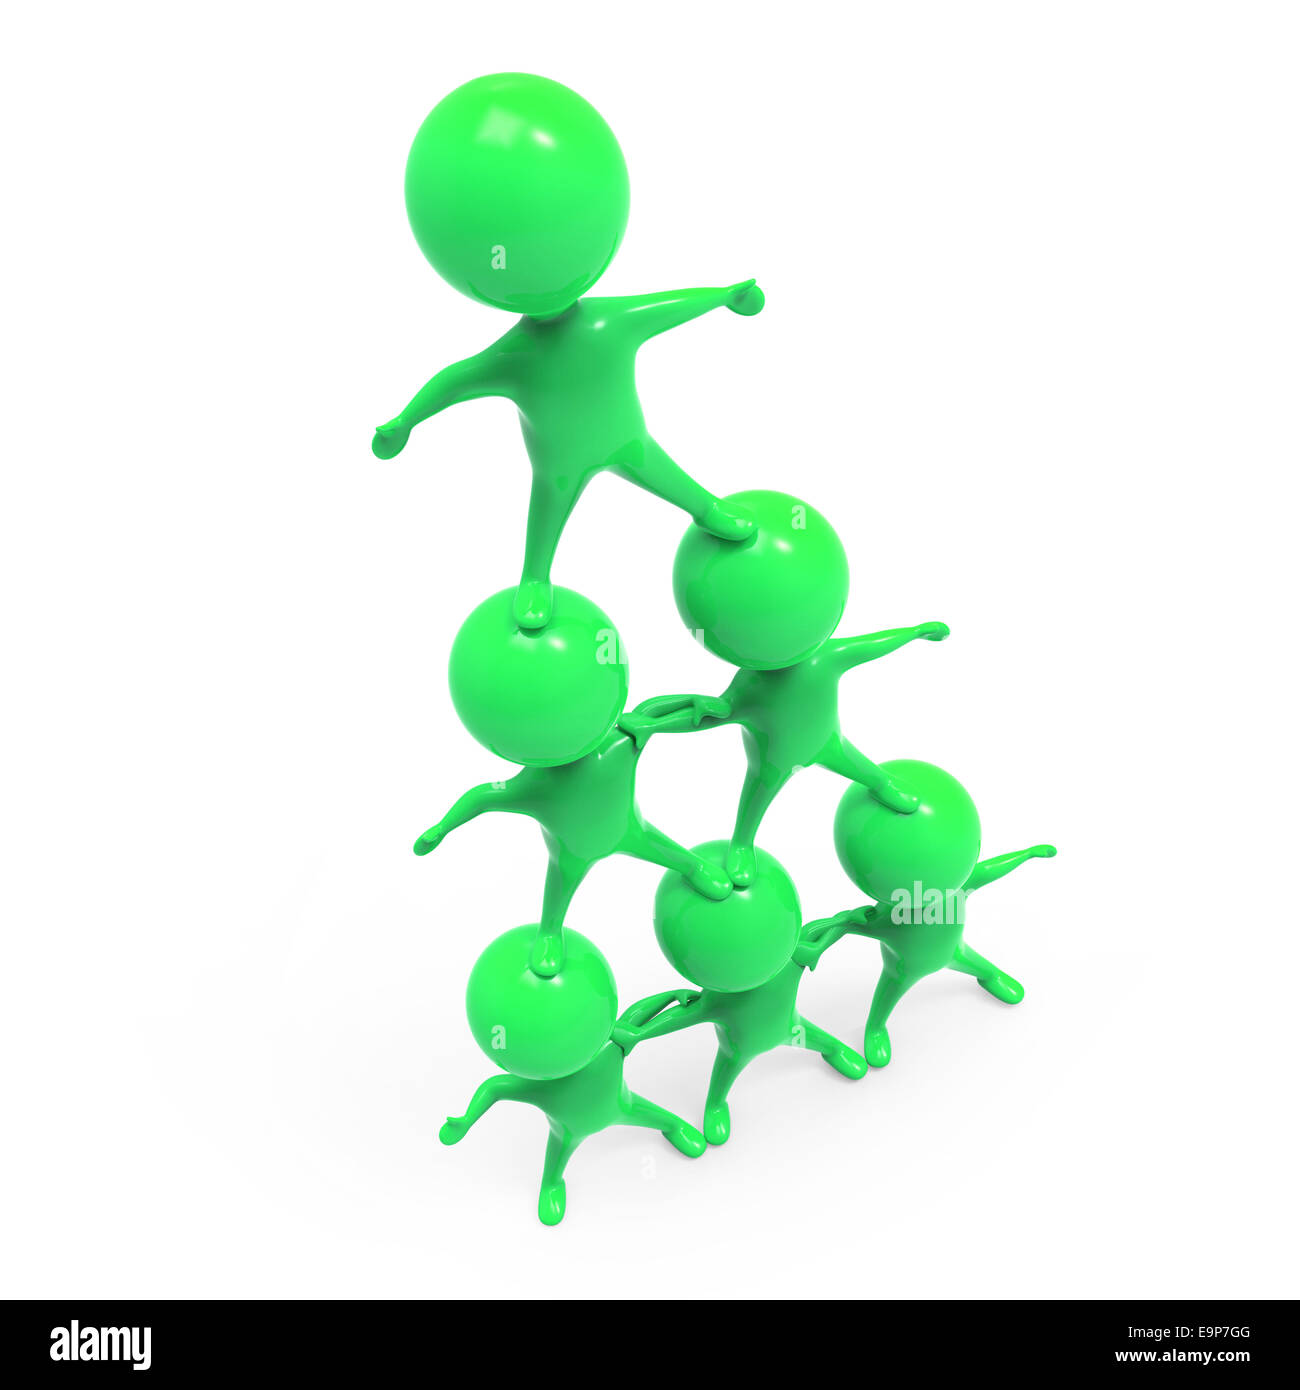 3d render of little green people forming a human pyramid Stock Photo